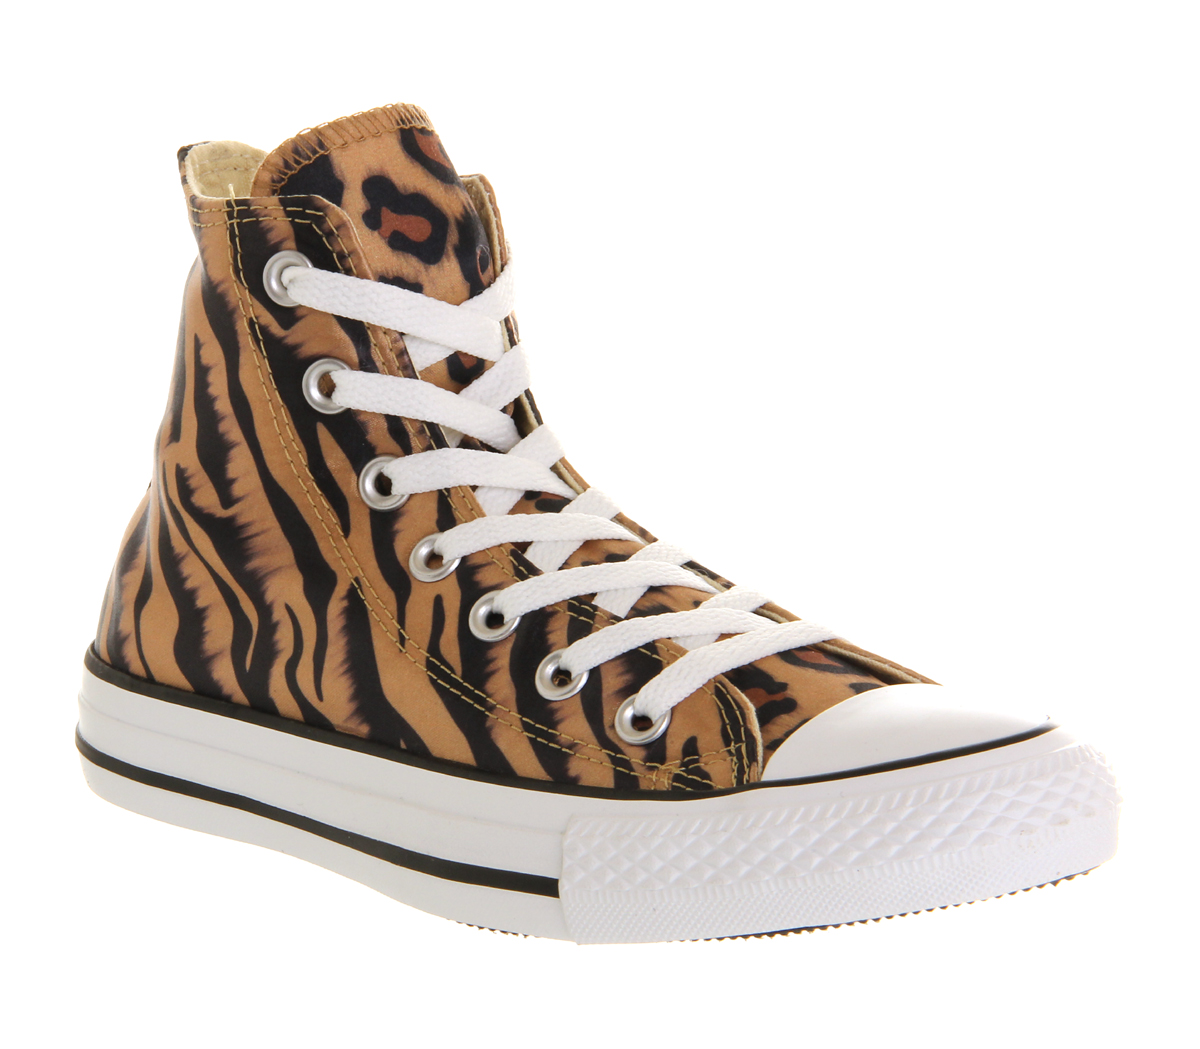 ConverseAll Star HiTiger Smudge 